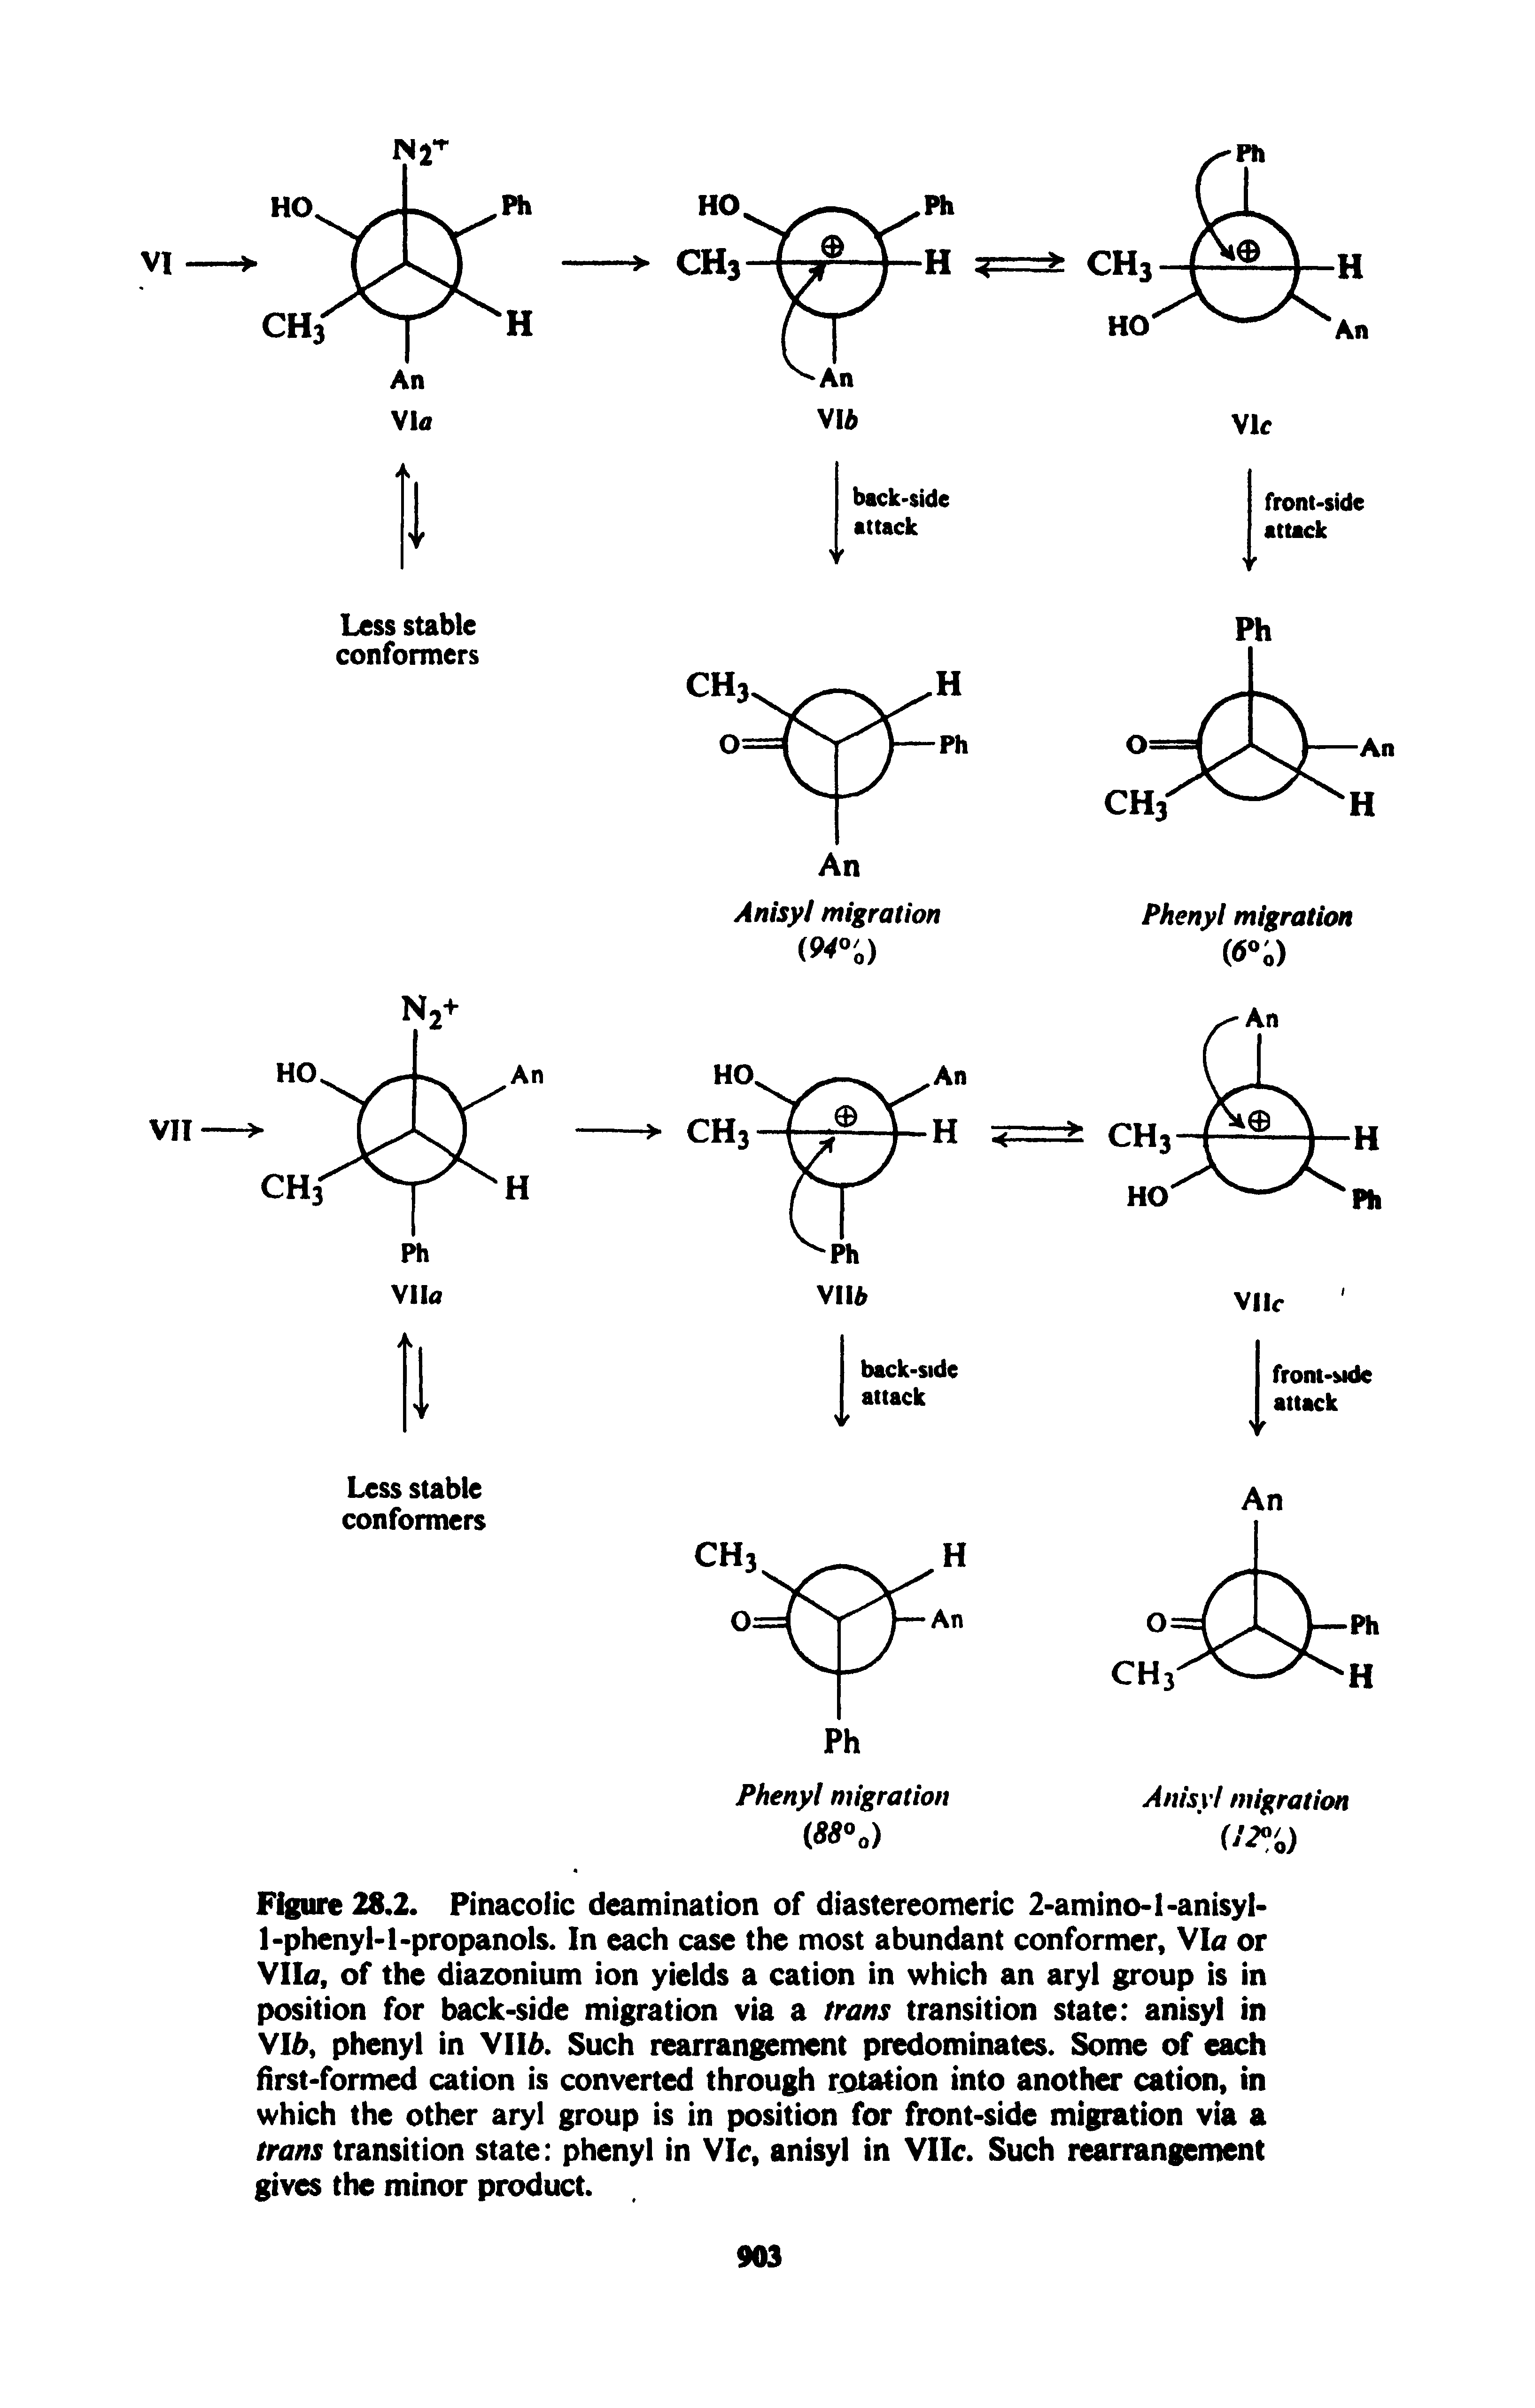 Figure 28.2. Pinacolic deamination of diastereomeric 2-amino-l-anisyl-1-phenyl-1-propanols. In each case the most abundant conformer. Via or Vila, of the diazonium ion yields a cation in which an aryl group is in position for back-side migration via a trans transition state anisyl in lb, phenyl in VII6. Such rearrangement predominates. Some of each first-formed cation is converted through rotation into another cation, in which the other aryl group is in position for front-side migration via a trans transition state phenyl in Vic, anisyl in VIIc. Such rearrangement gives the minor product.